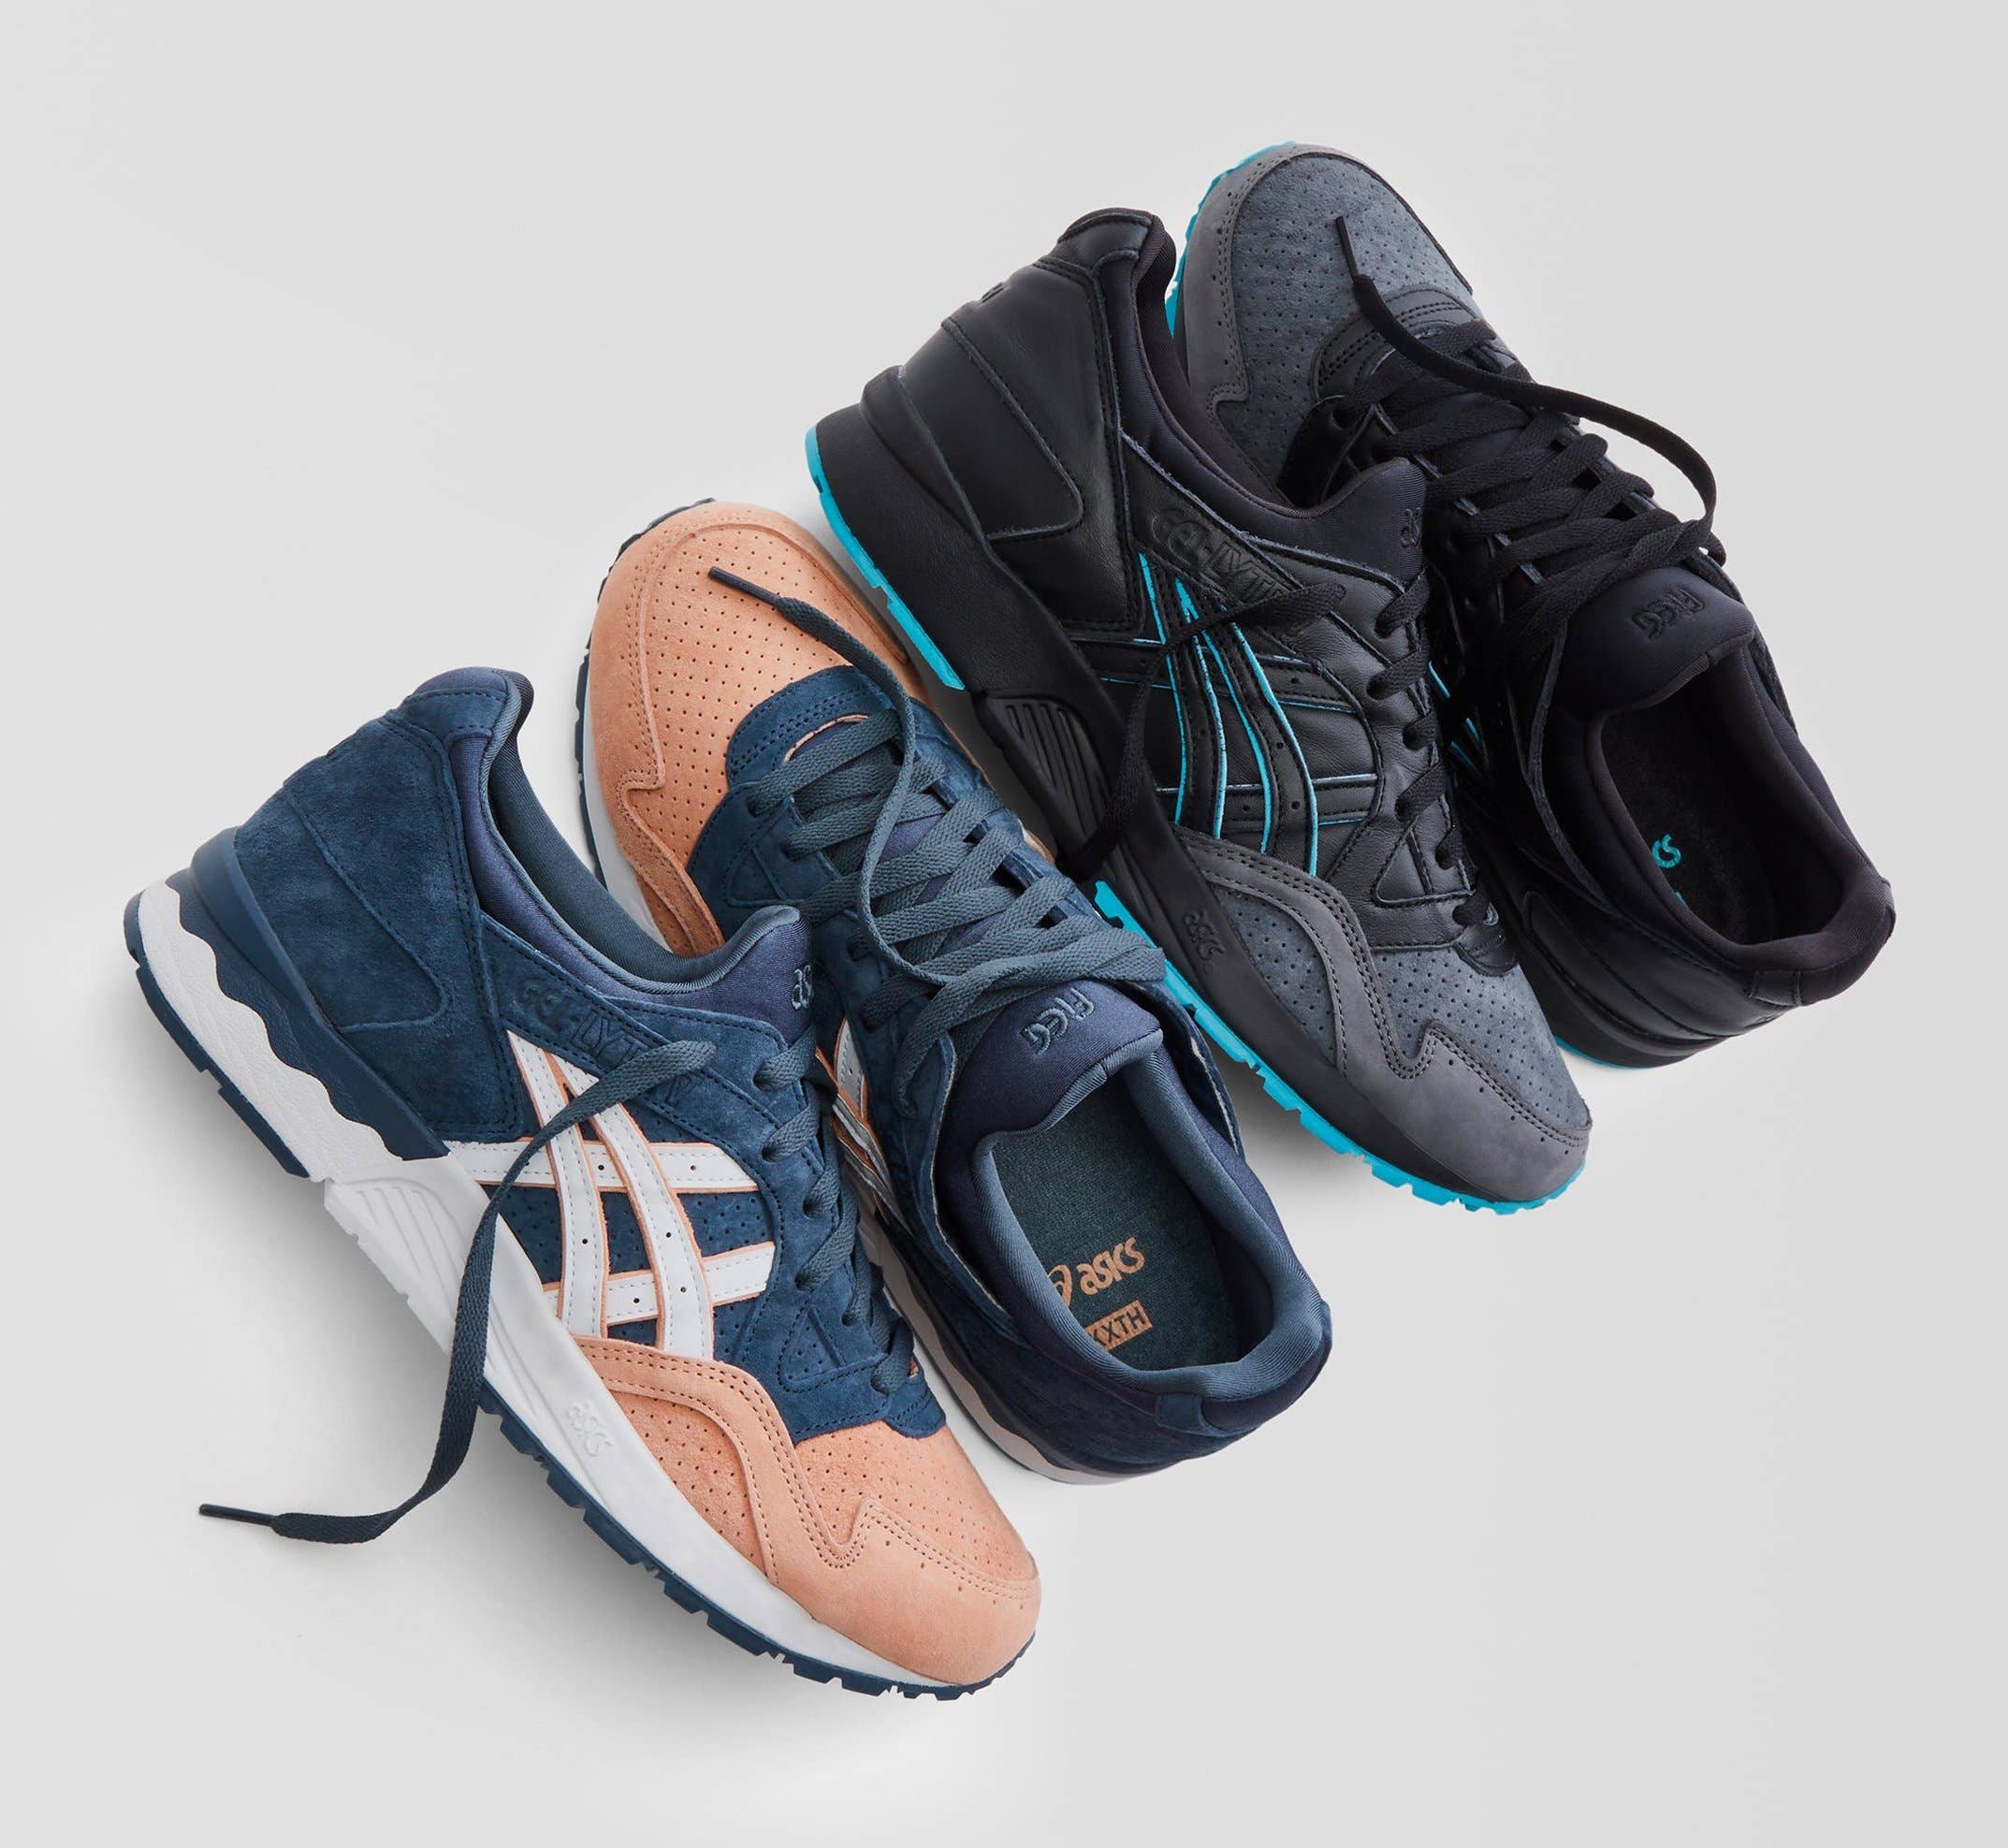 Ronnie Fieg Is Bringing Back 'Salmon Toe' And 'Leather Back' Asics | Complex